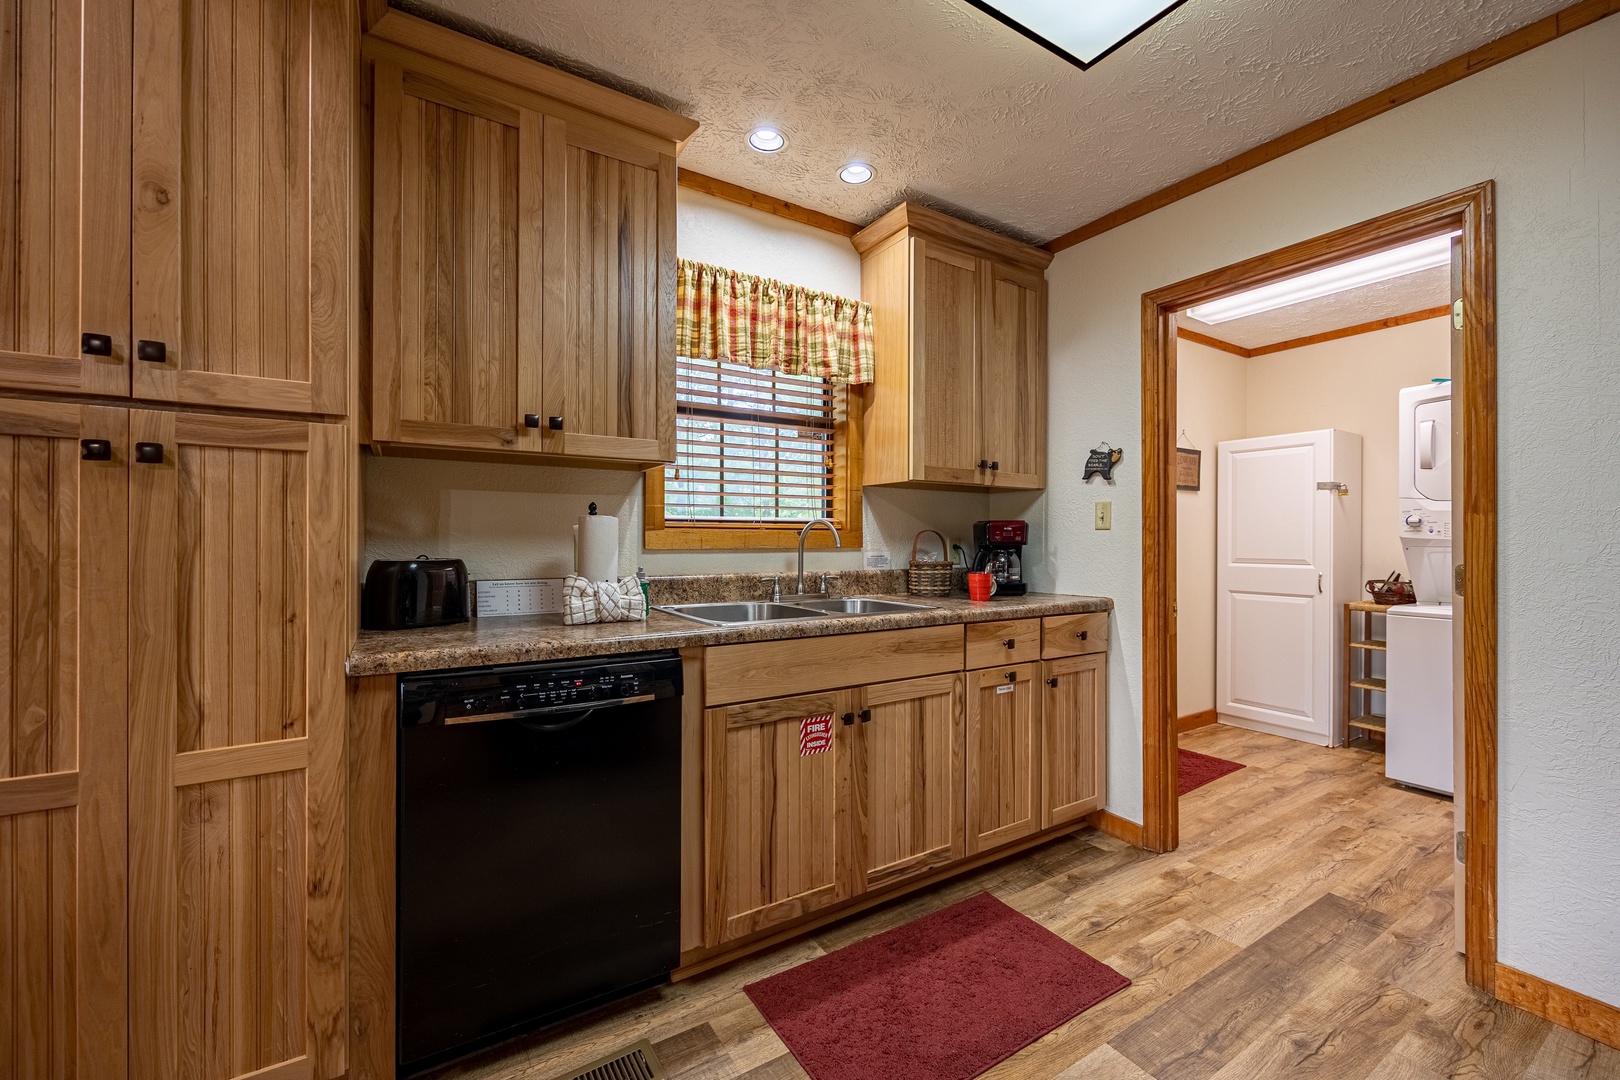 Kitchen and pantry at Cabin On The Hill, a 1 bedroom cabin rental located in Pigeon Forge